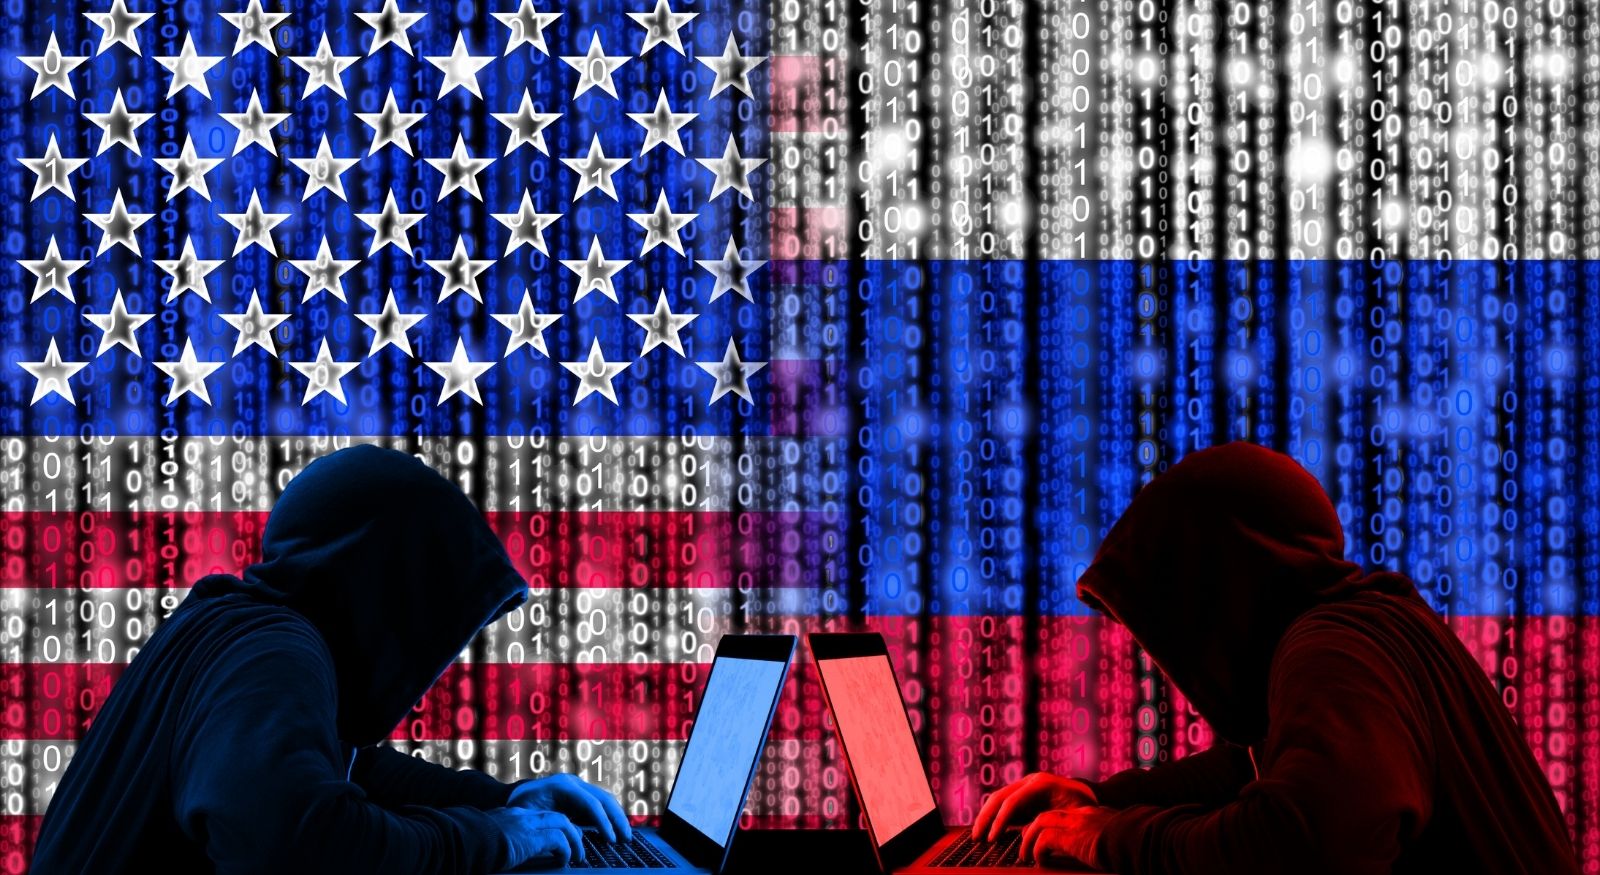 *UPDATED AS OF 3/9/21* Cozy Bear Strikes Again: Russians Hack US Agencies via “Supply Chain Attack”